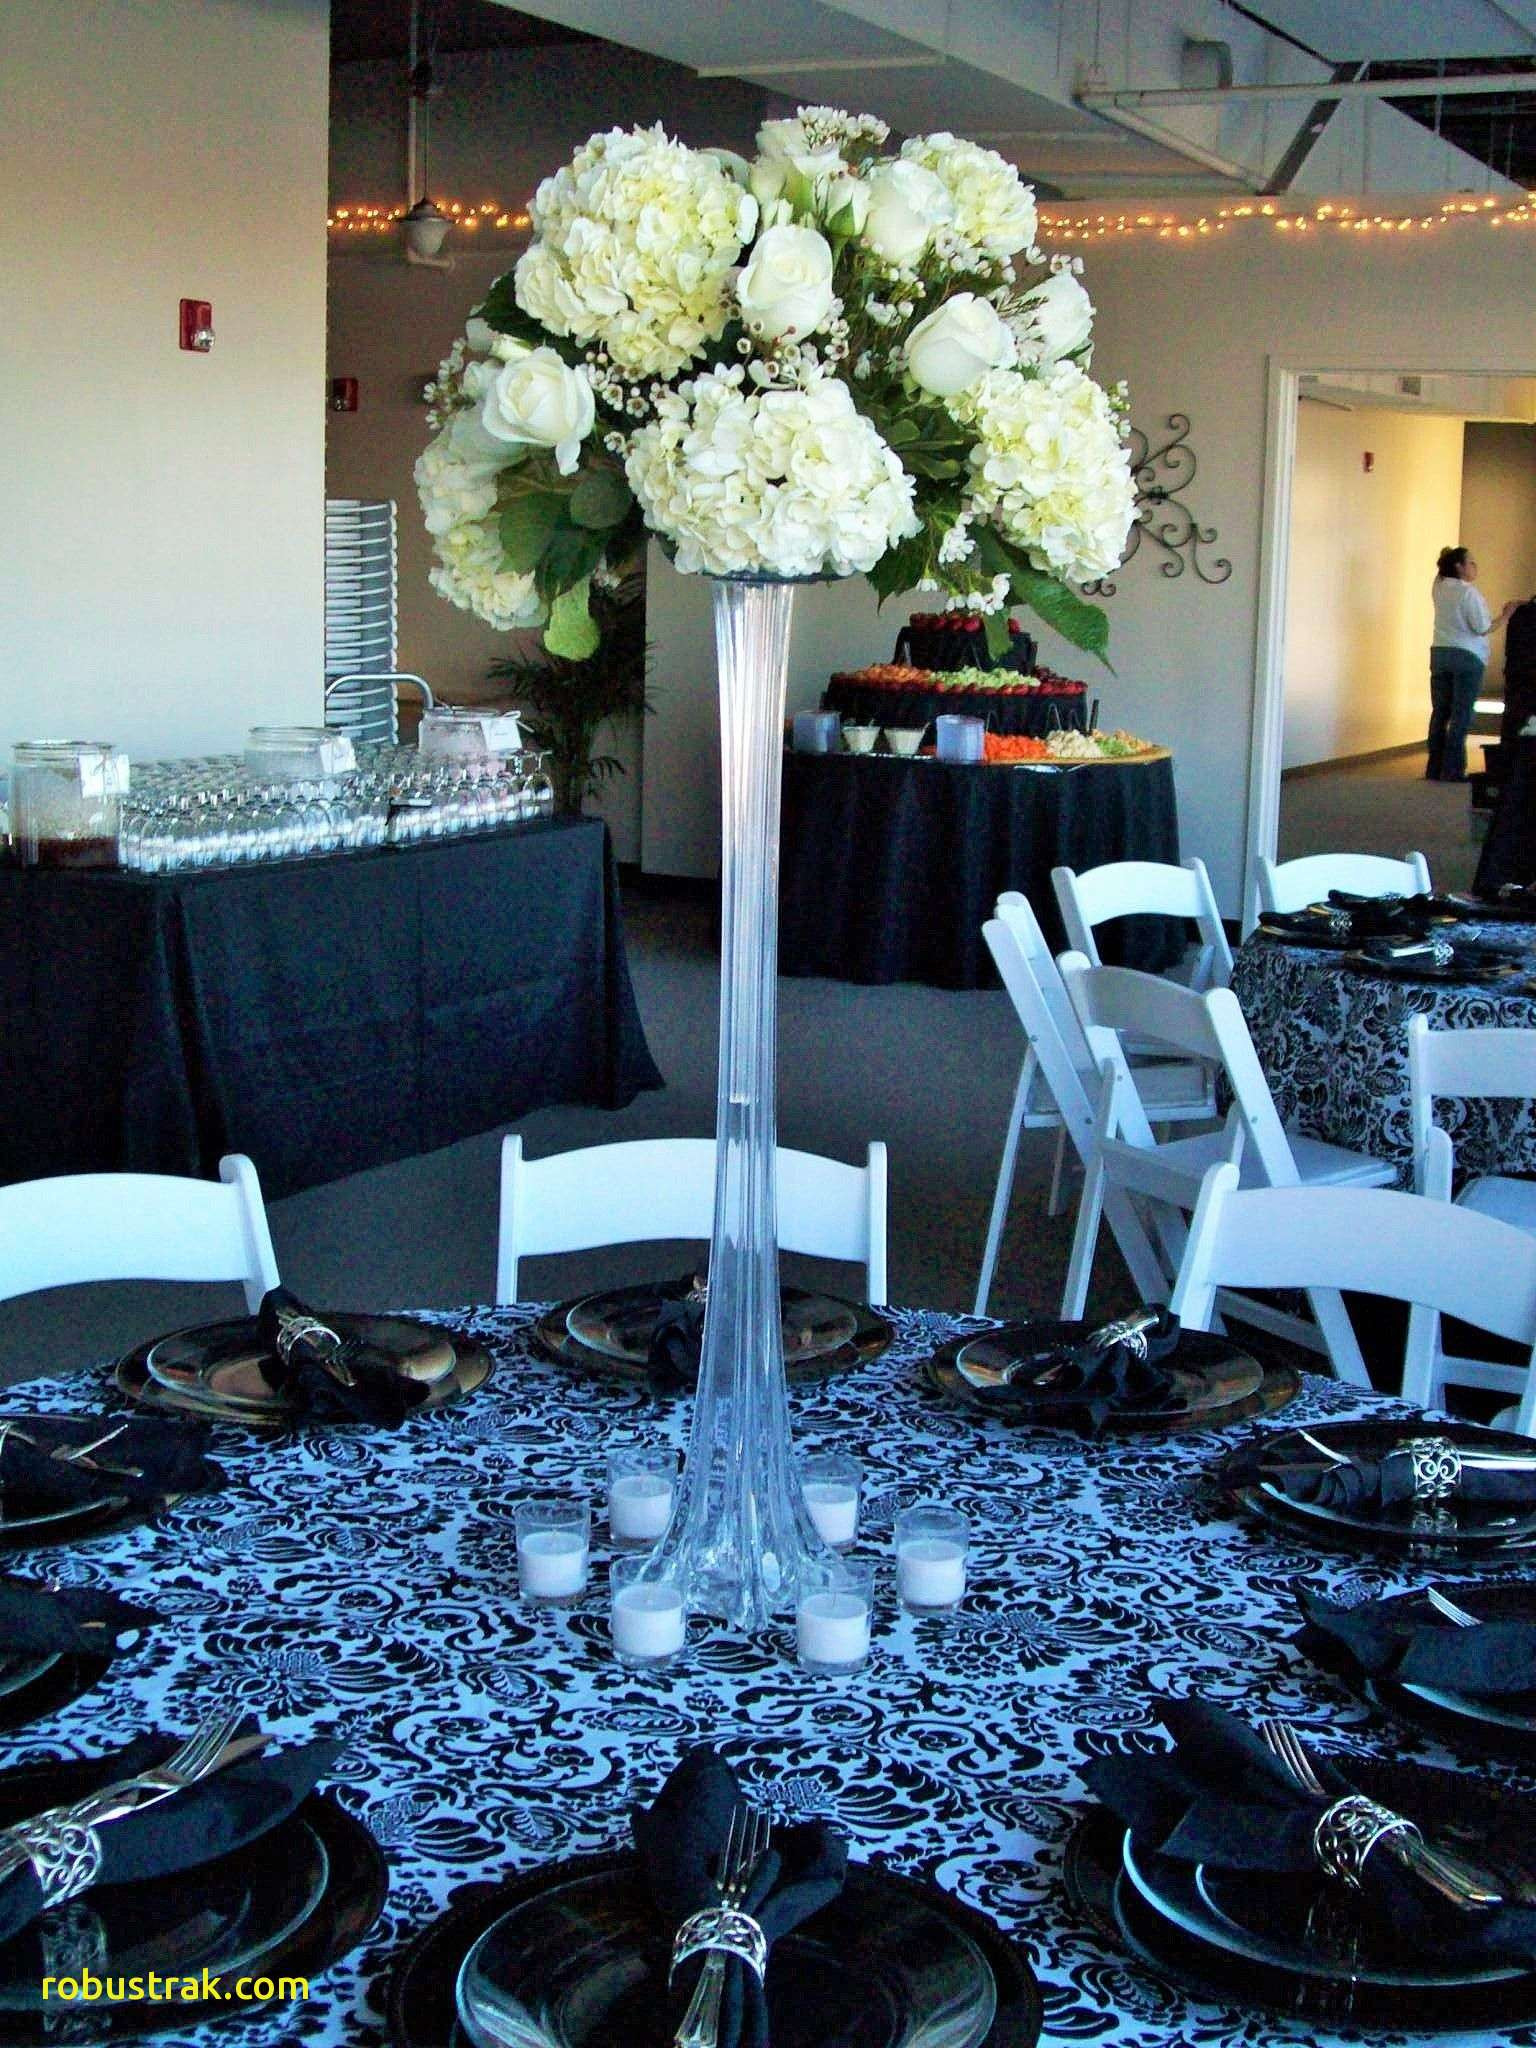 20 Famous Flower Arrangements In Tall Glass Vases 2024 free download flower arrangements in tall glass vases of tall glass table decorations awesome tall glass vase wedding with tall glass table decorations awesome tall glass vase wedding centerpiece with whi